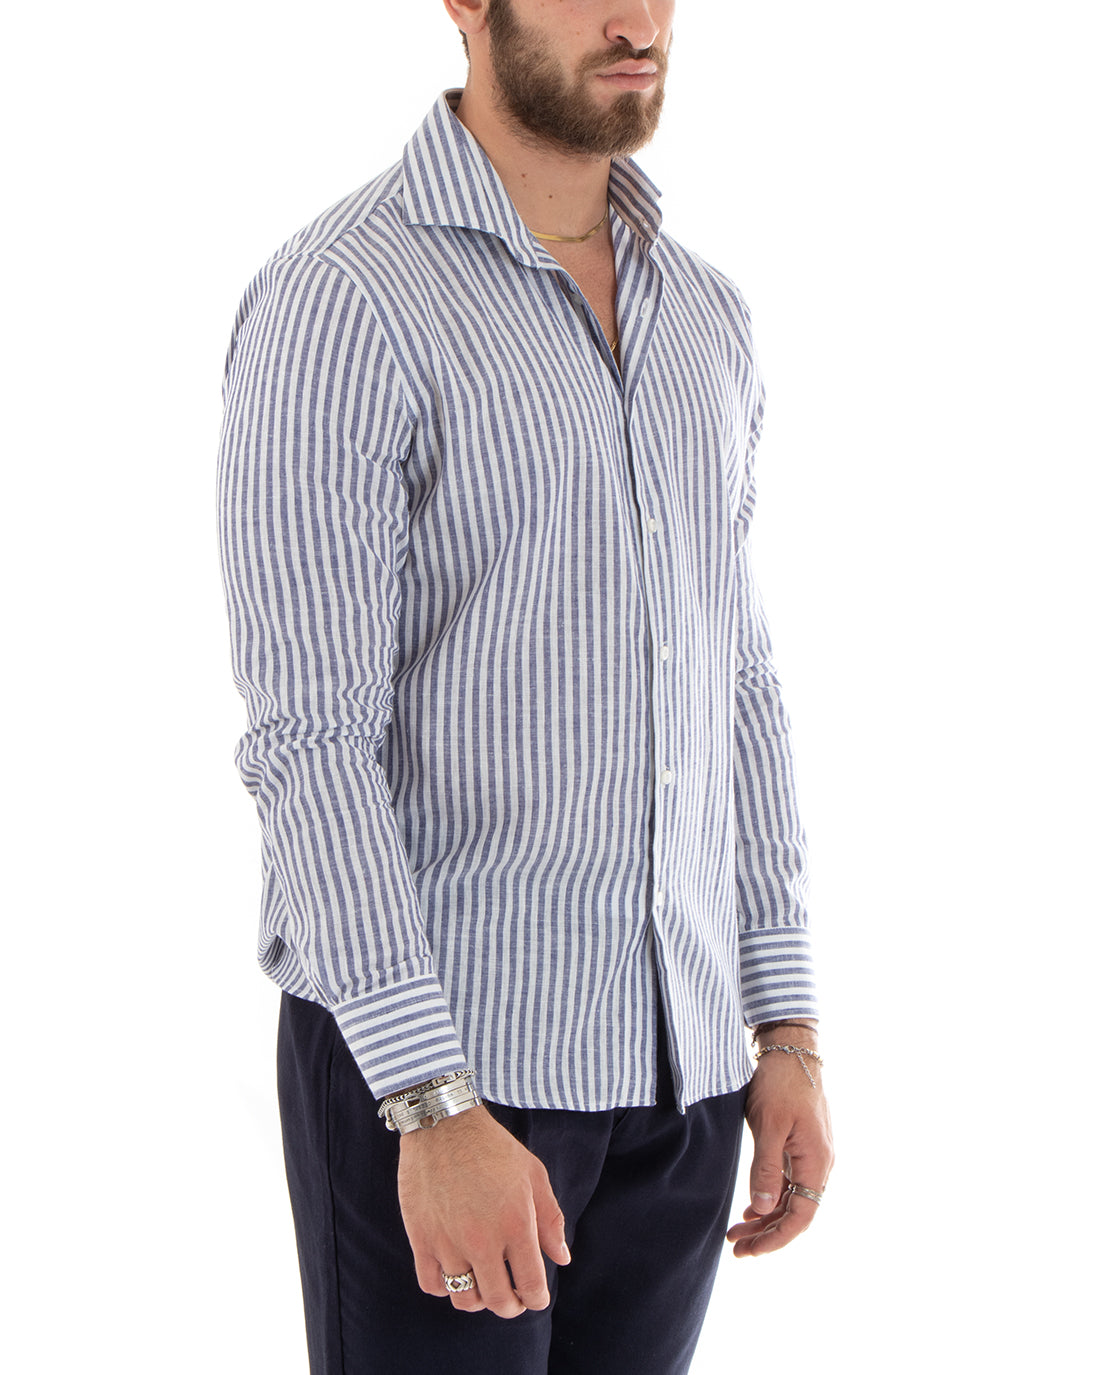 Men's Shirt With French Collar Tailored Long Sleeve Linen Narrow Striped Blue GIOSAL-C2688A